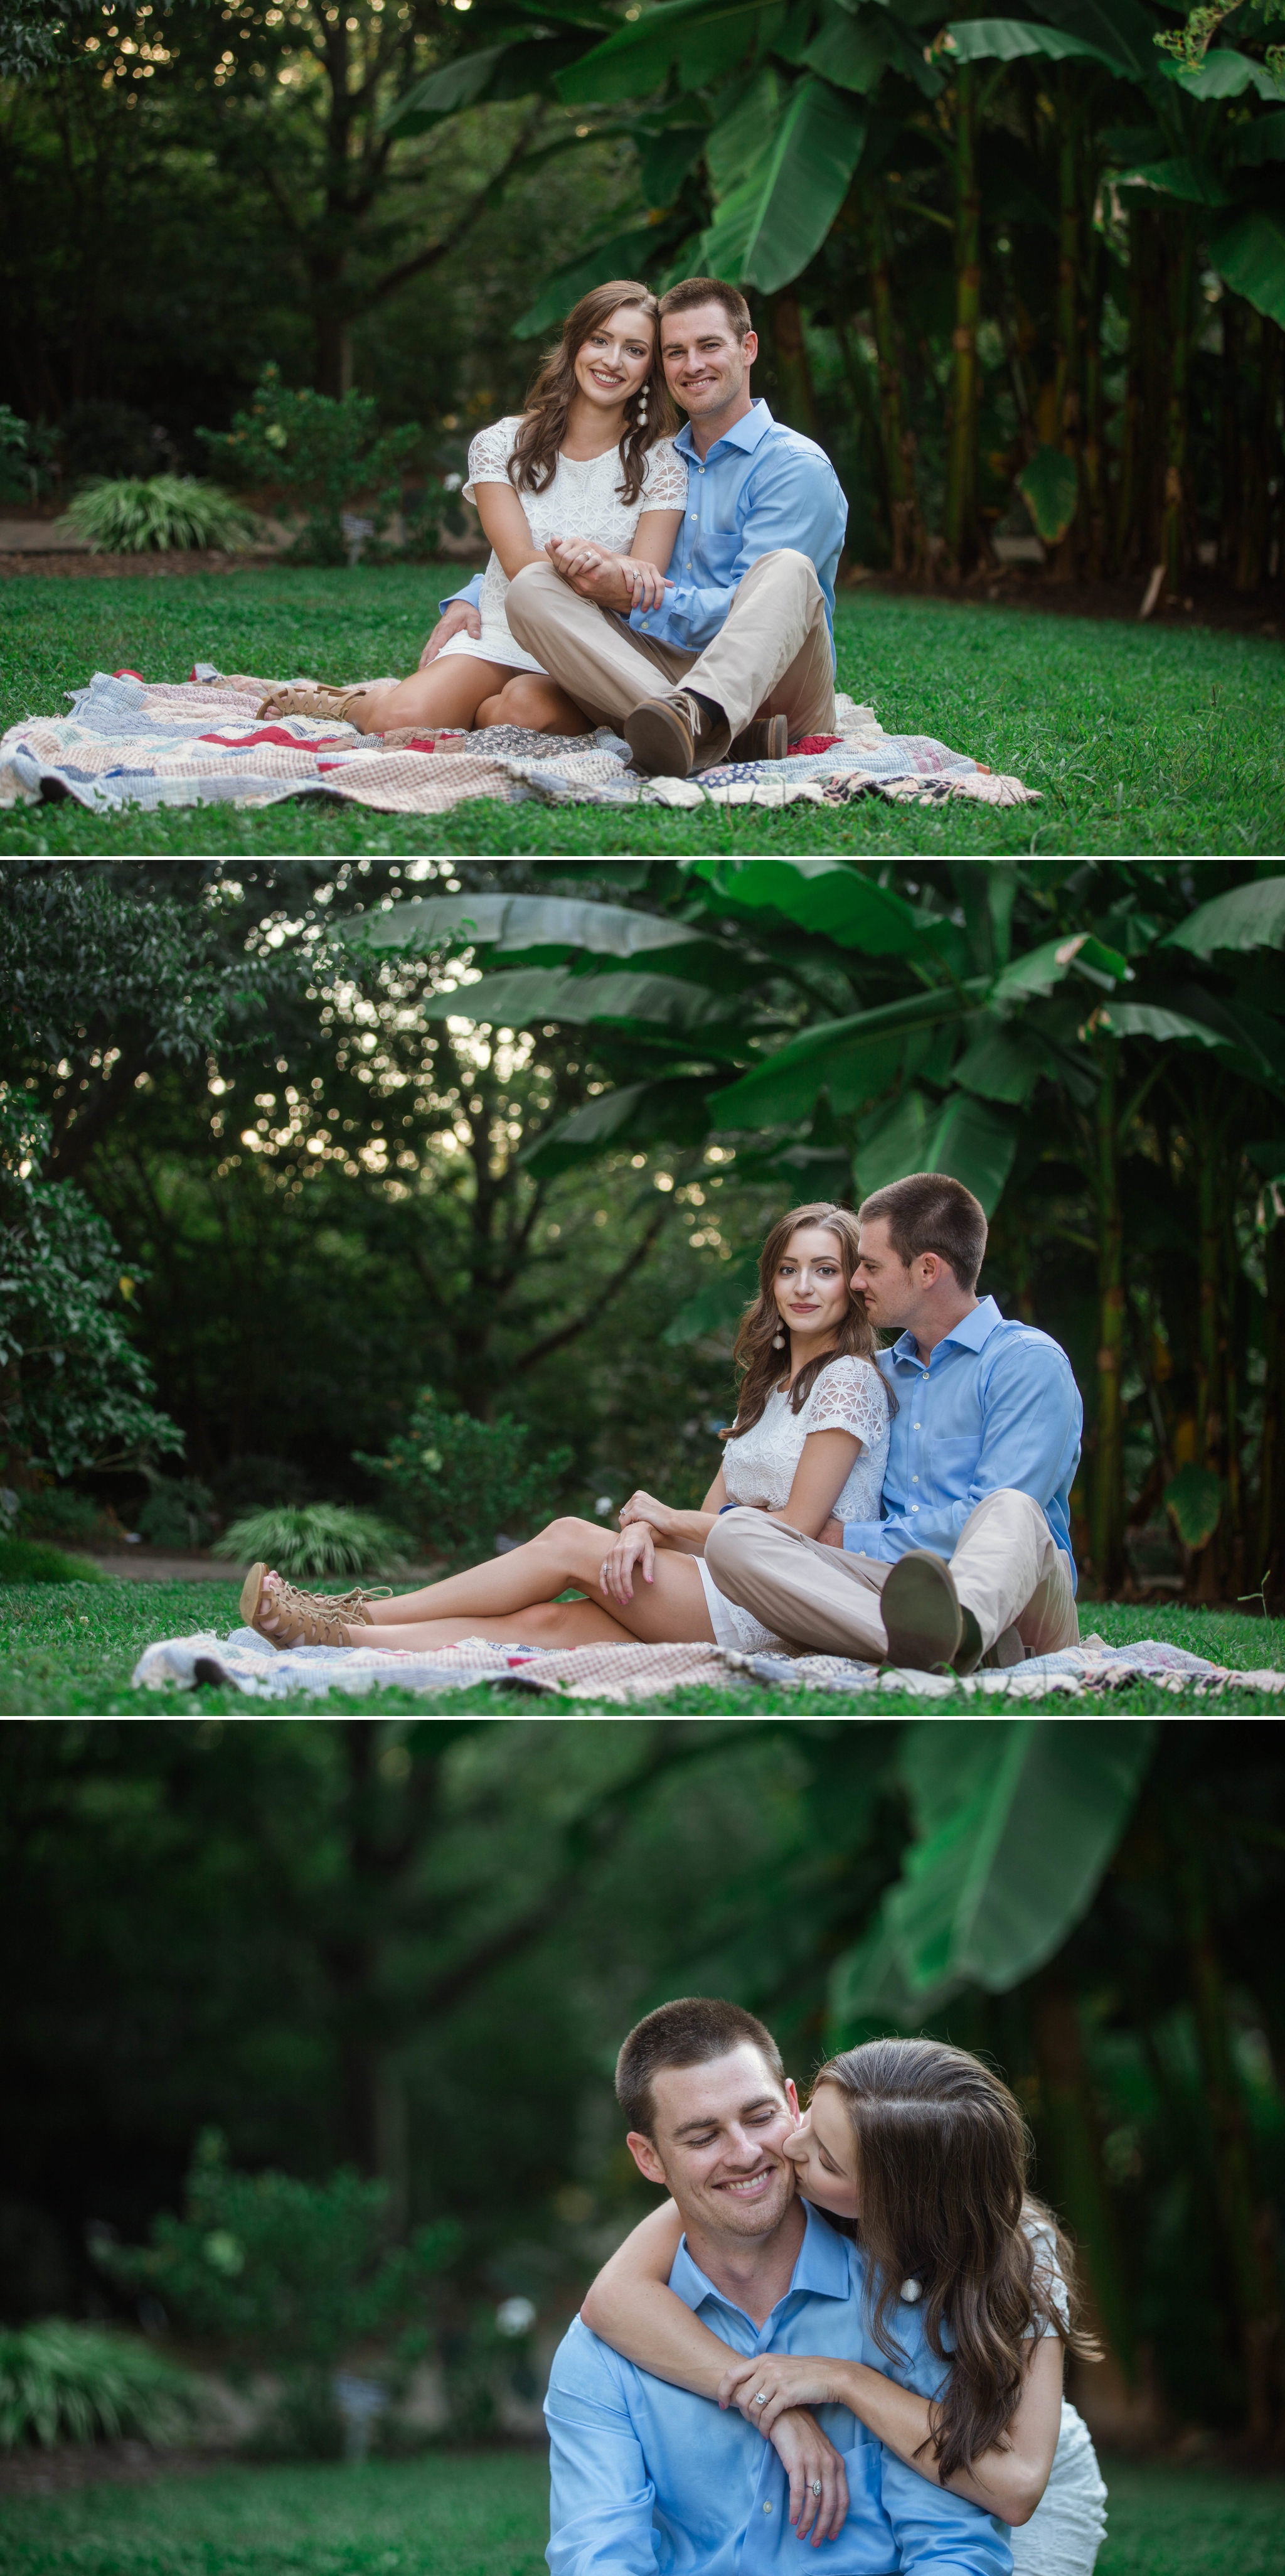 Paige + Tyler - Engagement Photography Session at the JC Raulston Arboretum - Raleigh Wedding Photographer 7.jpg